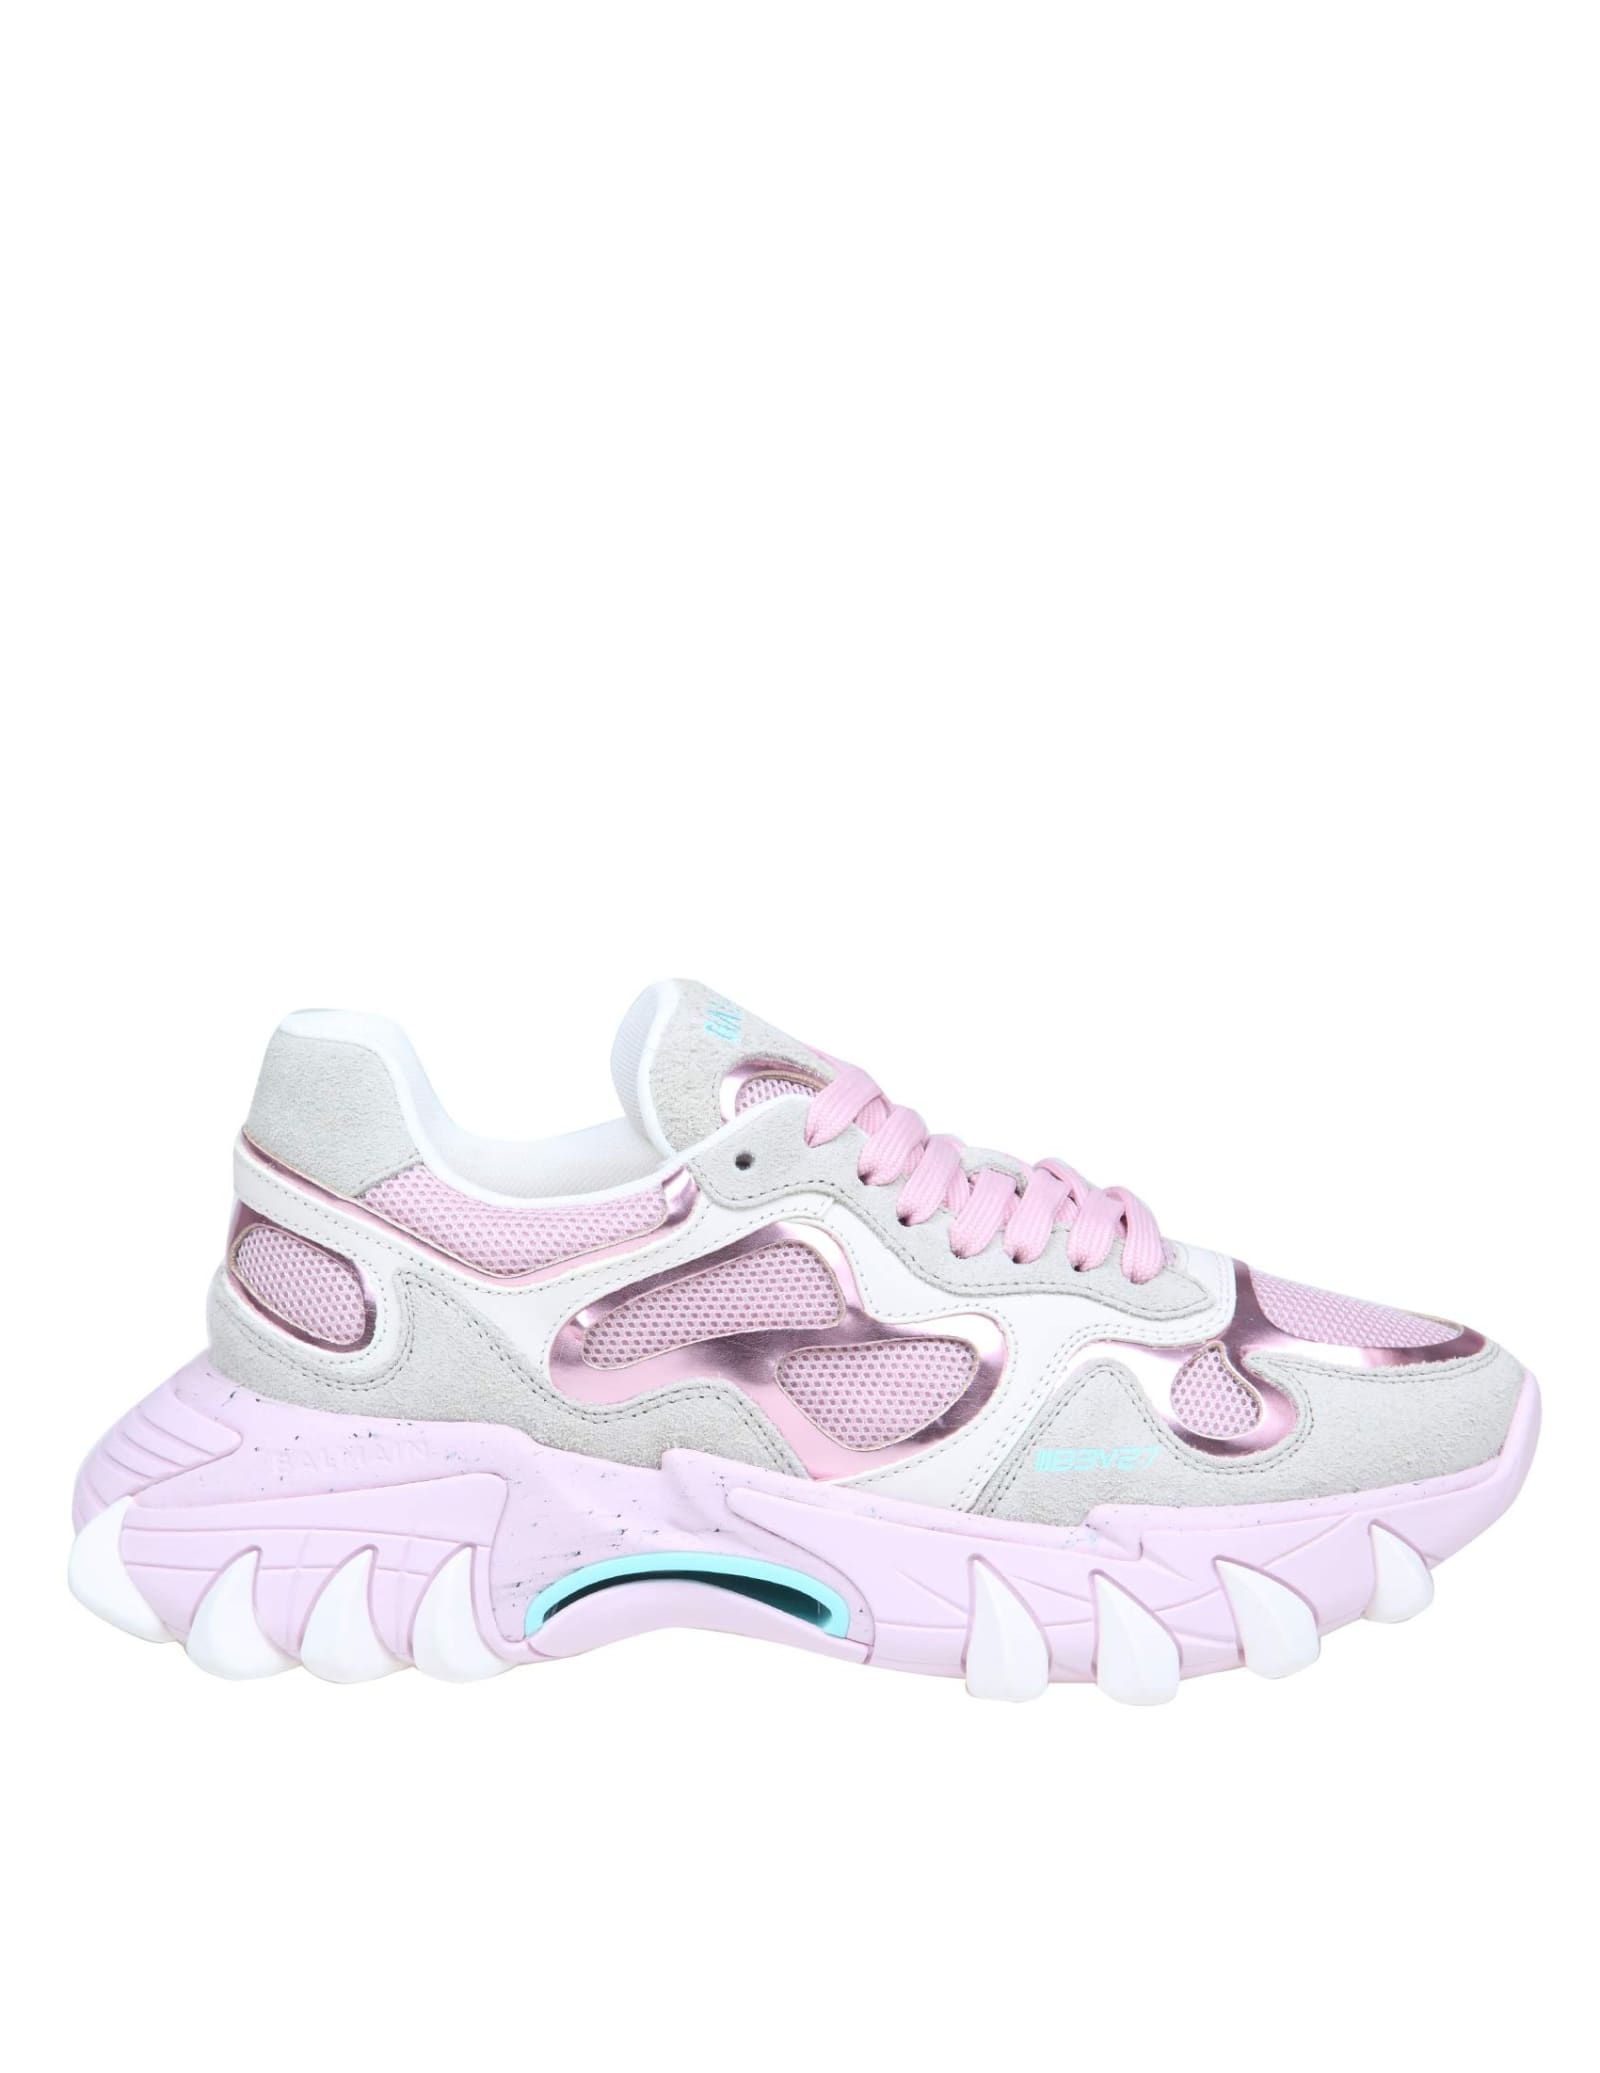 Balmain B-east Sneakers In Leather And Net Color White And Pink